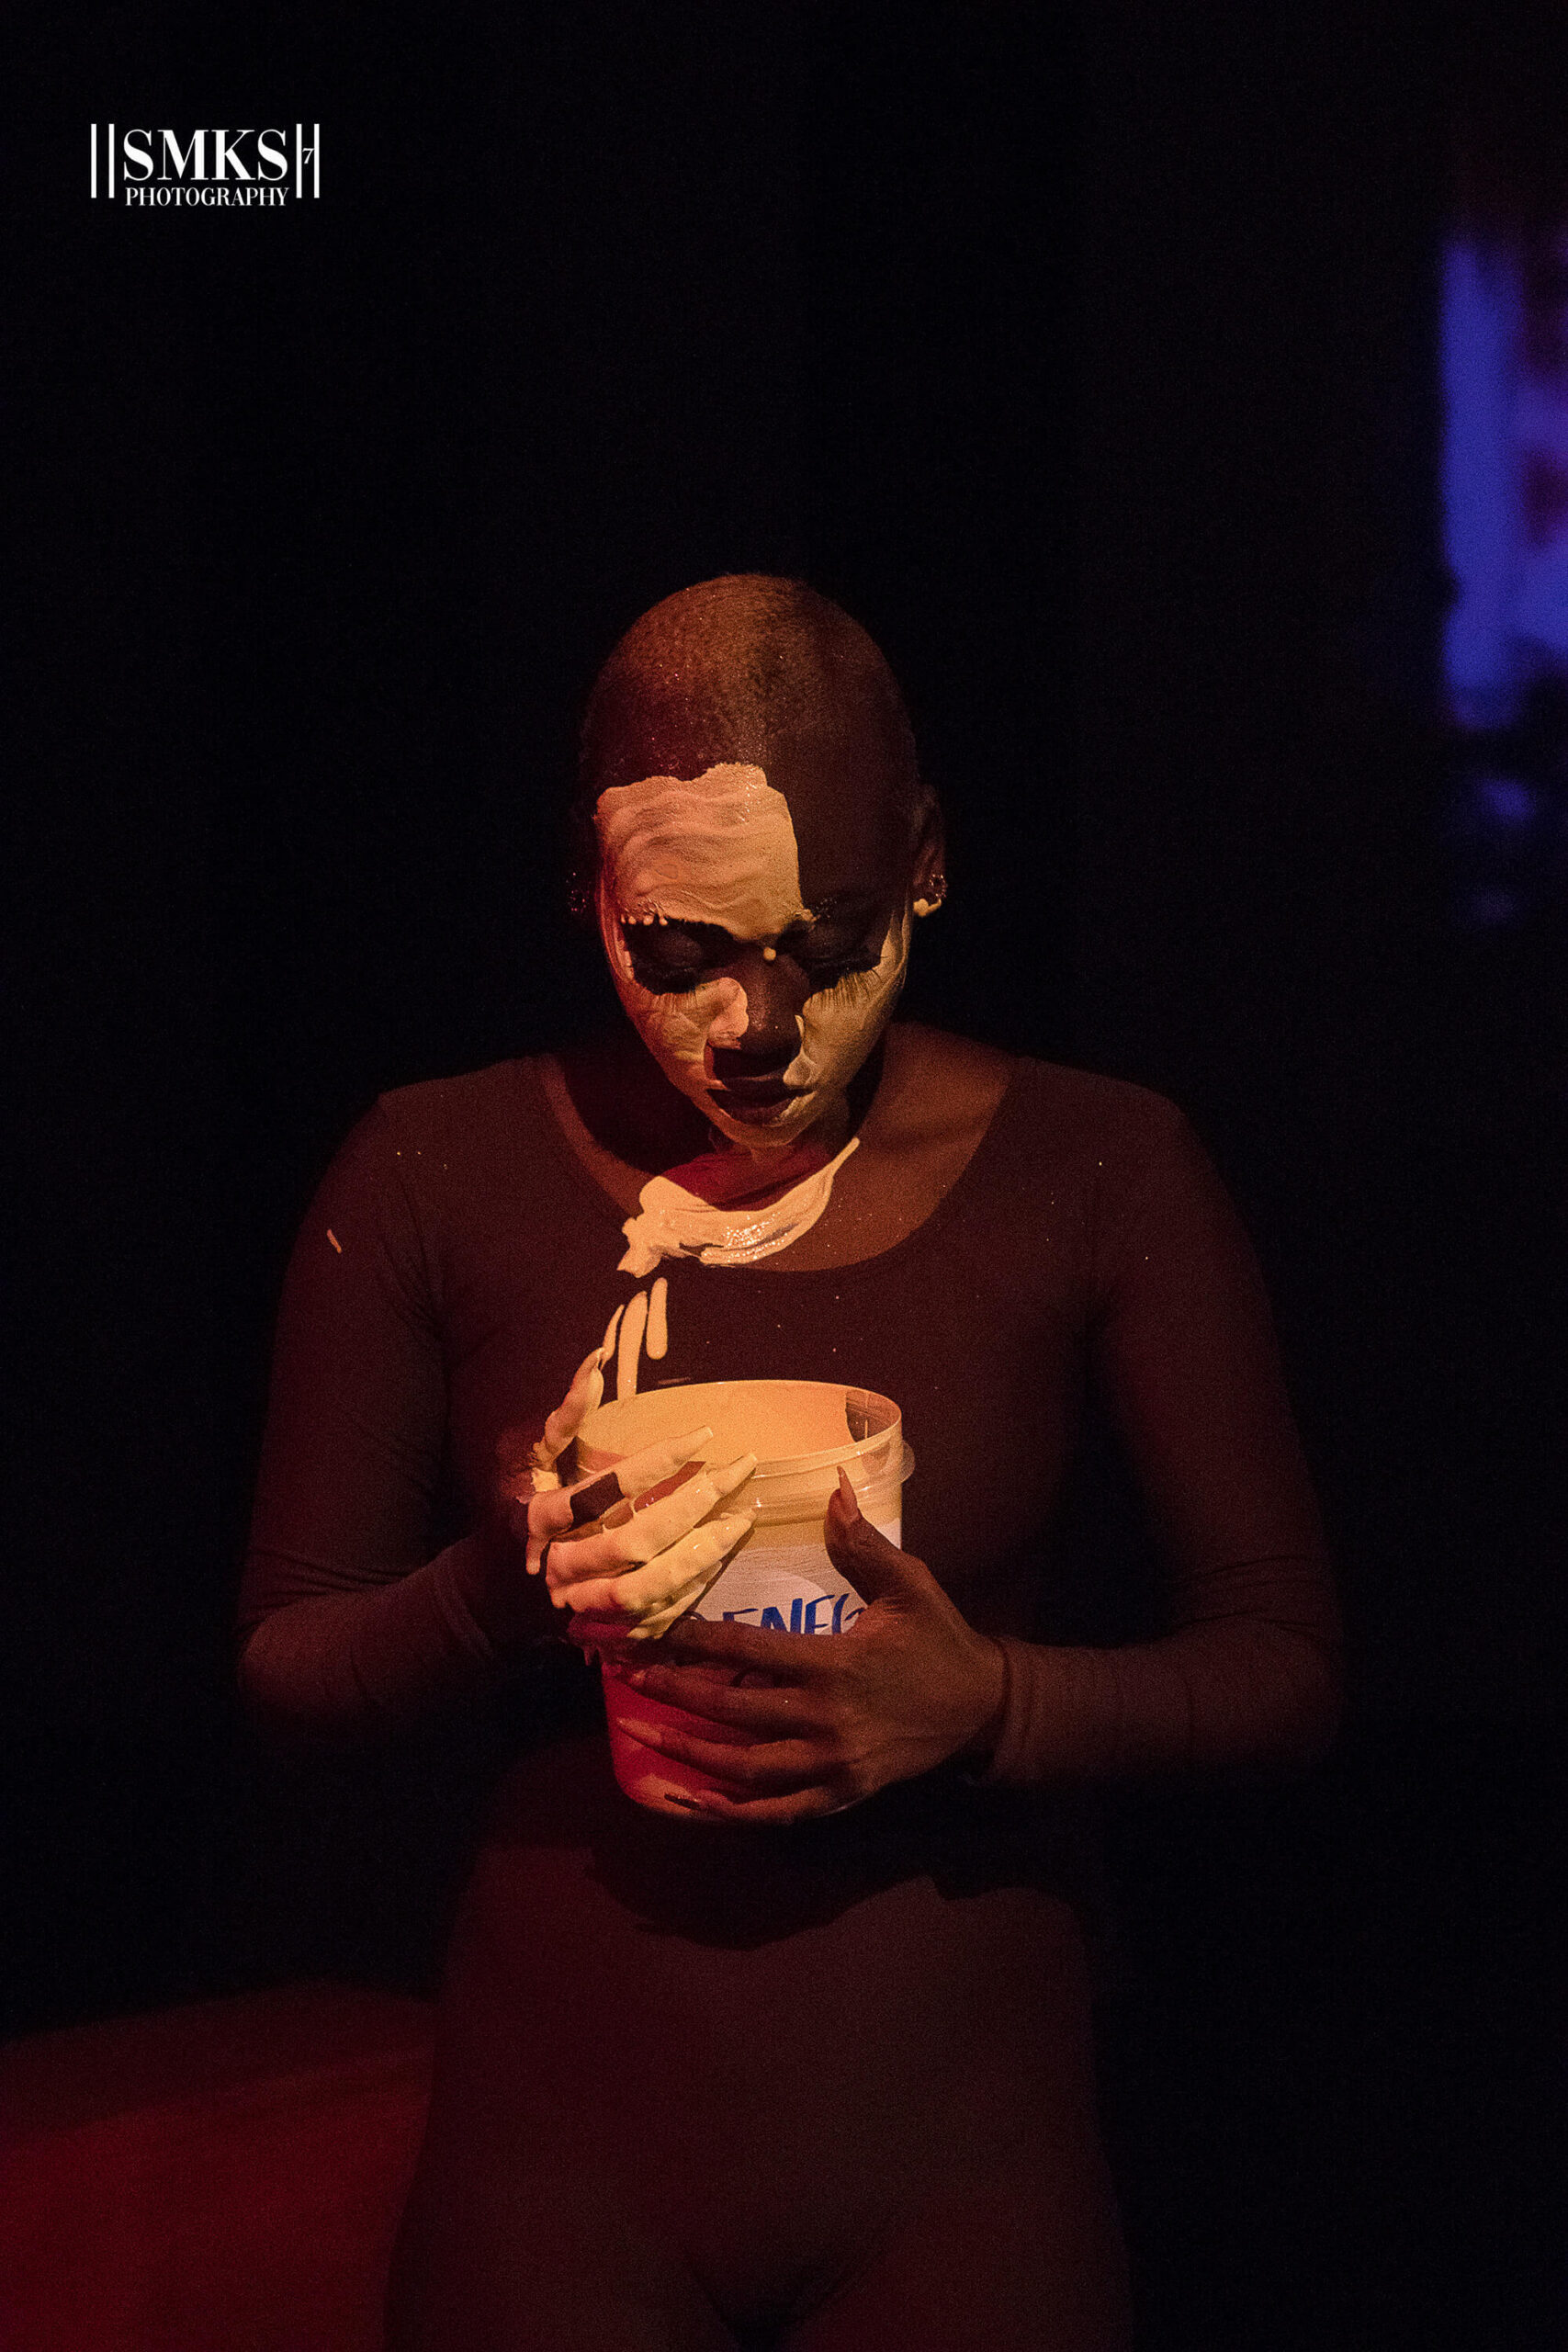 A Black figure in a shadow looks downward. She is holding a bucket of white paint and has smeared white paint on most of her face.